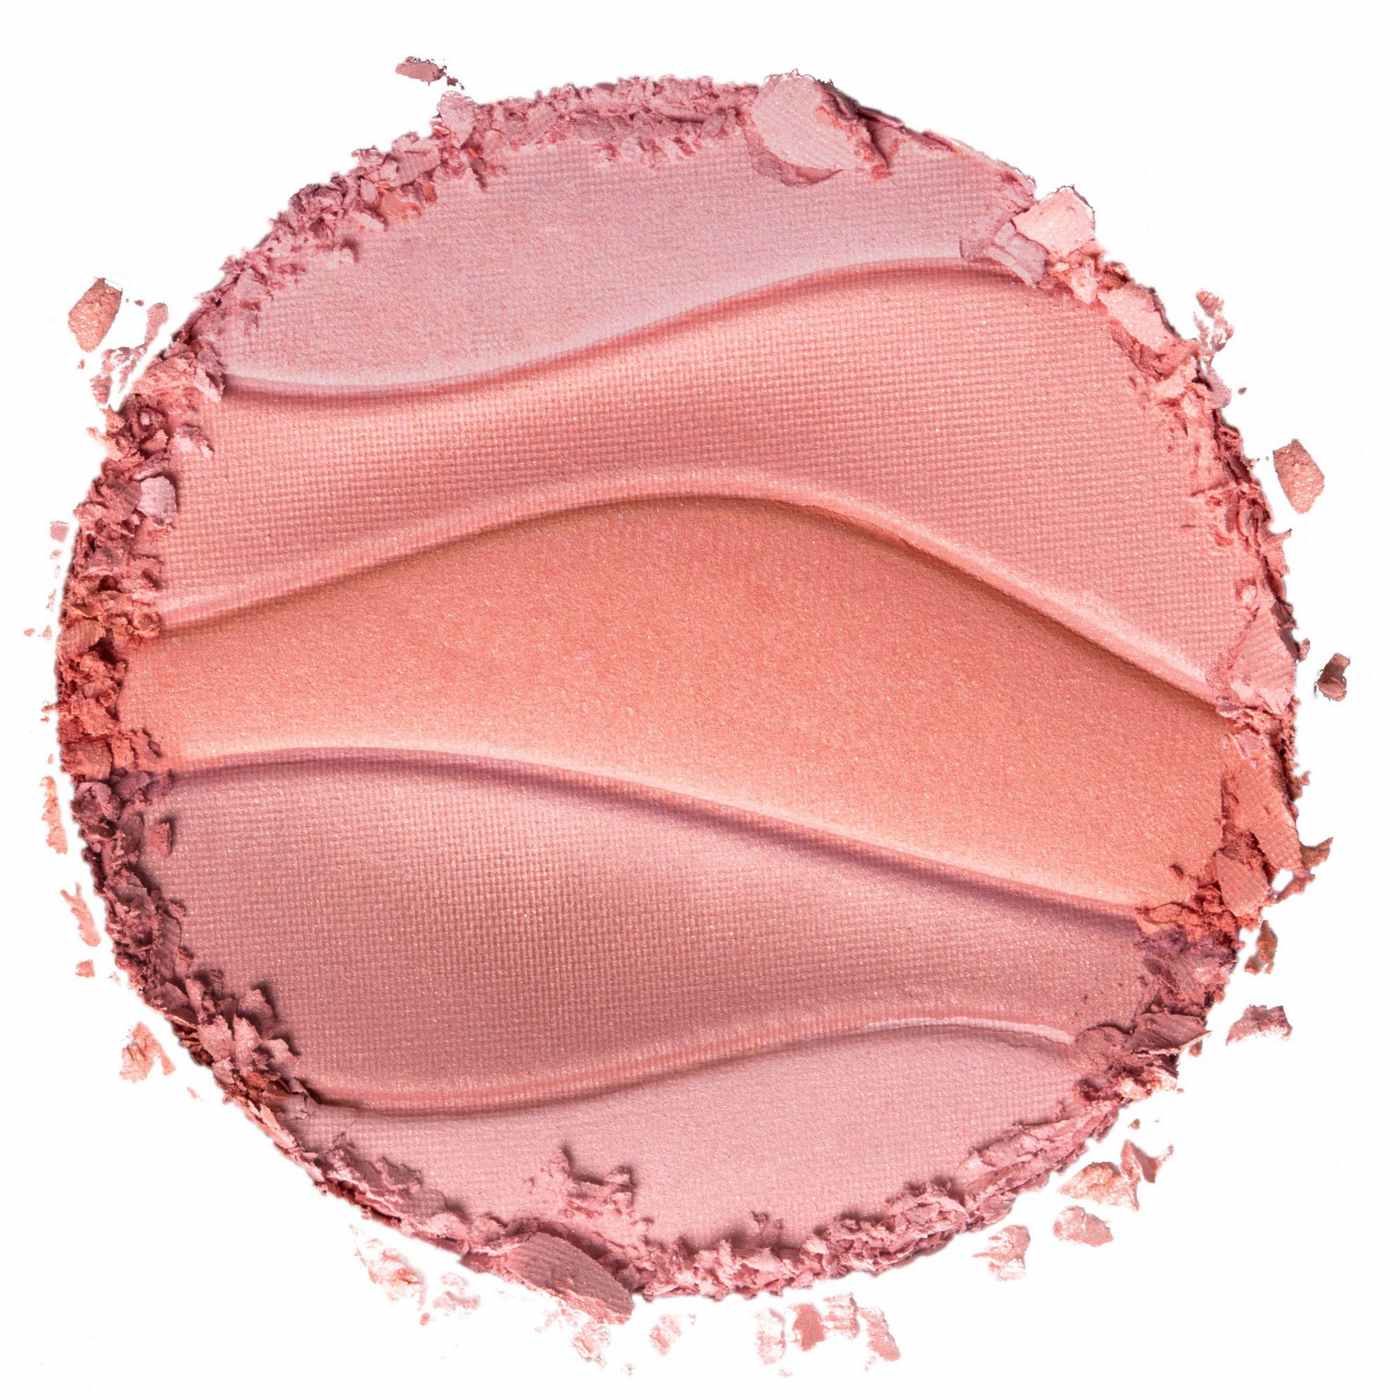 Physicians Formula Butter Believe It! Blush Pink Sands; image 2 of 5